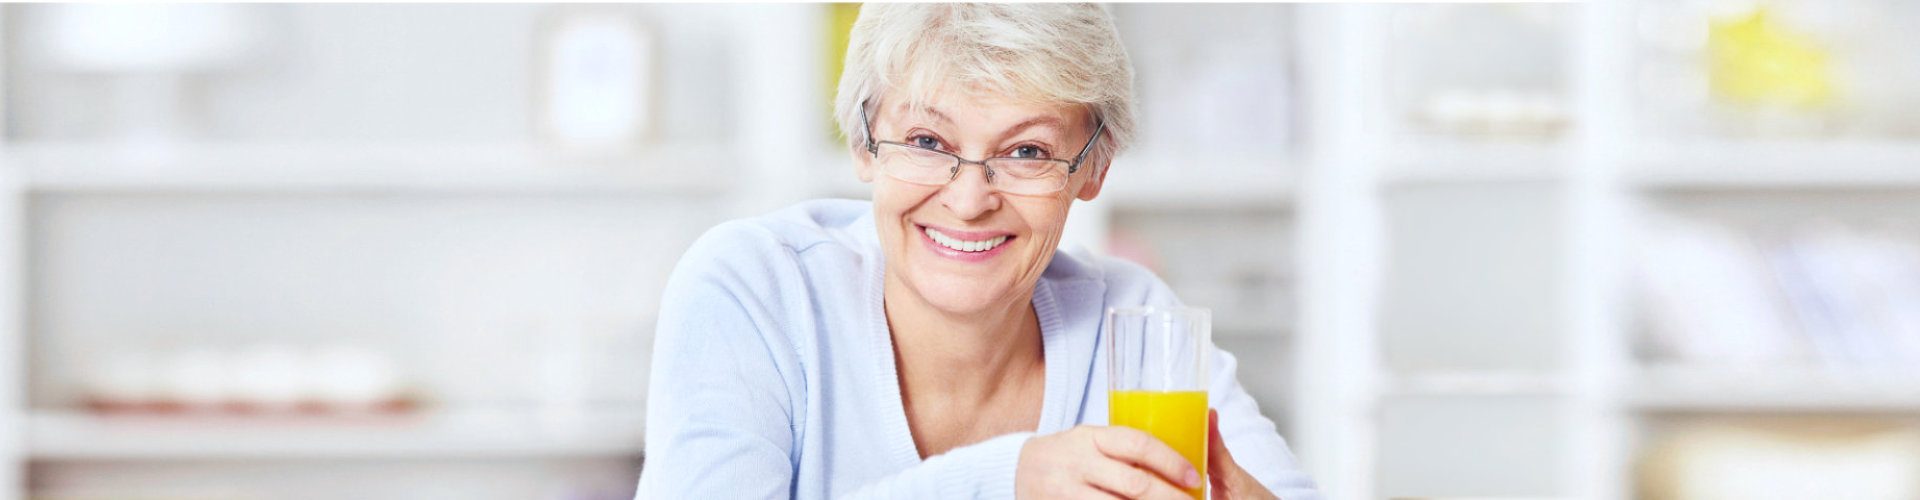 senior woman smiling holding a glass of juice